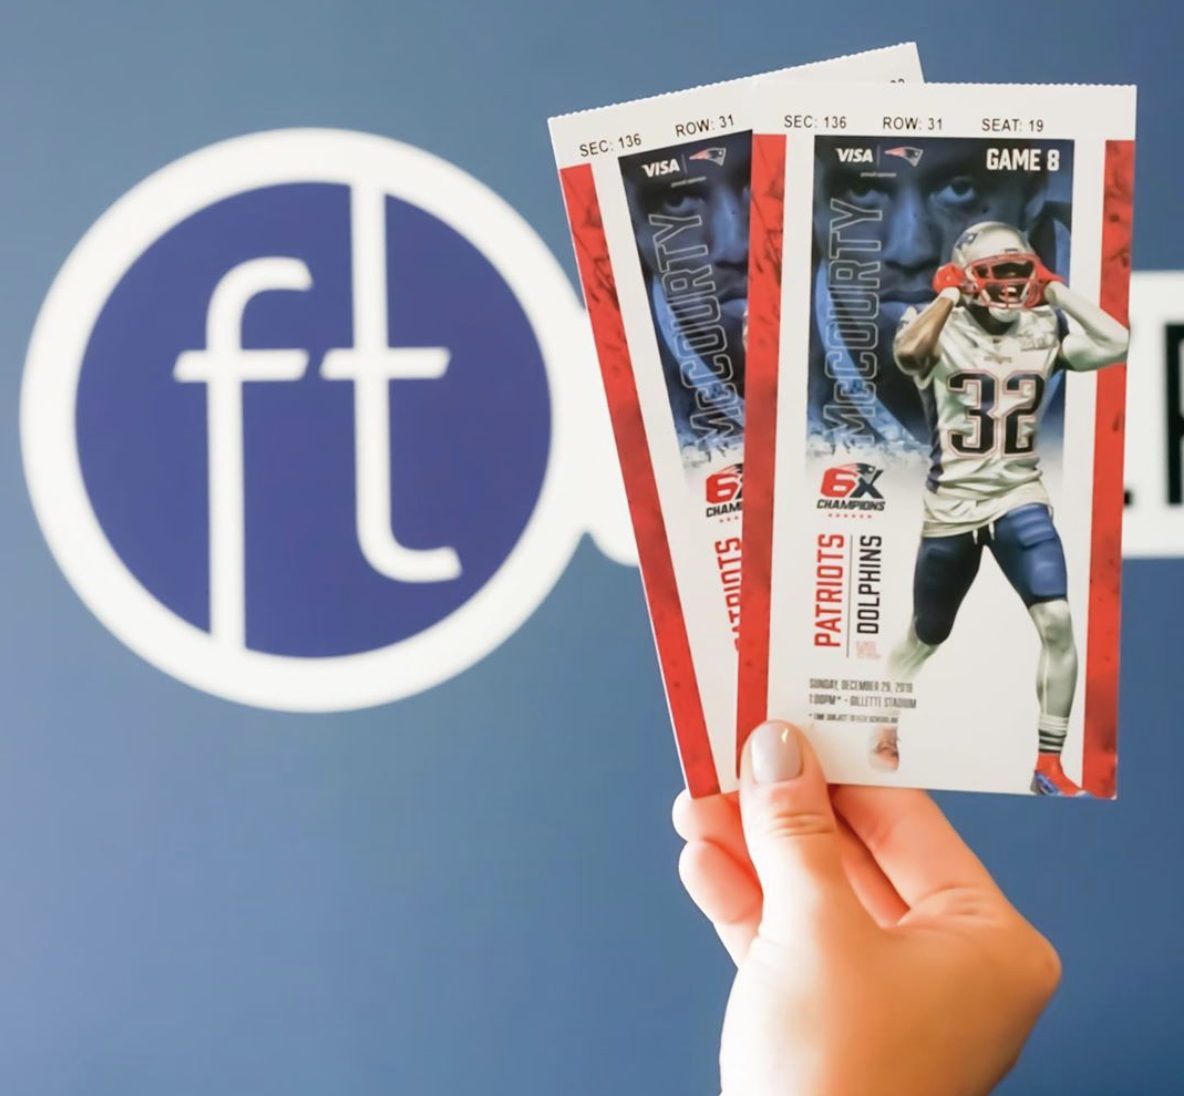 Last Chance To Win Patriots Tickets from the Fitzpatrick Team